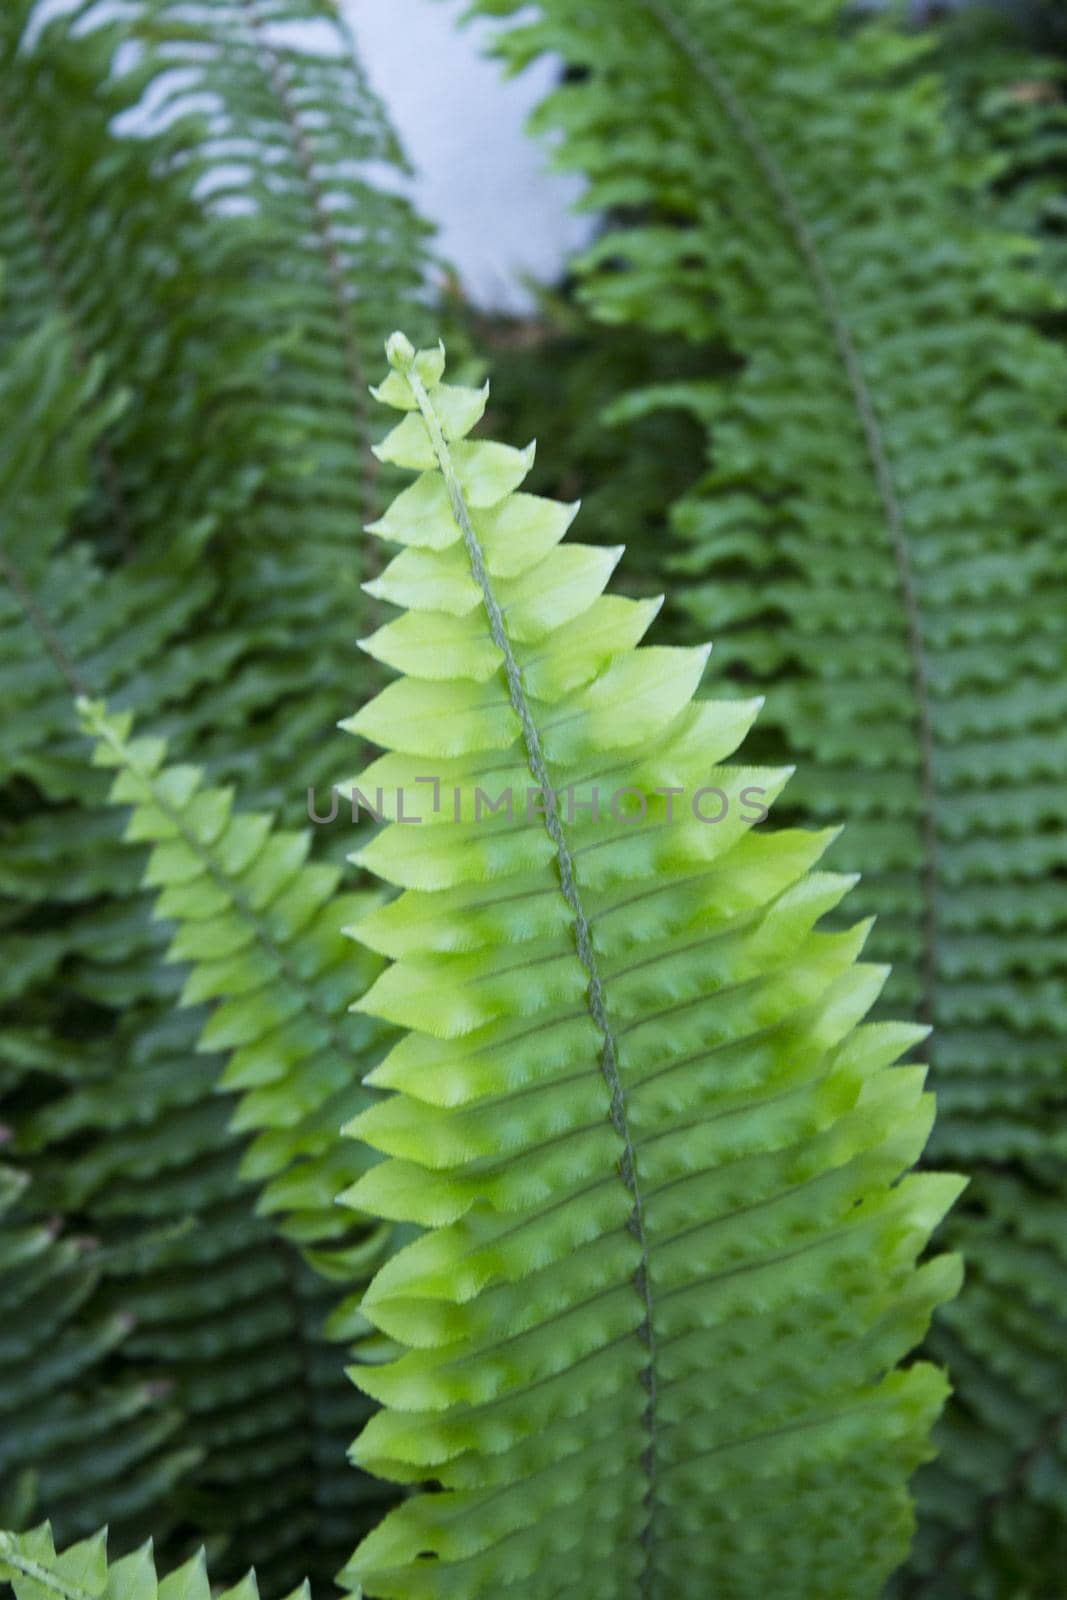 Dark green fern leaves in tropical environment. No people